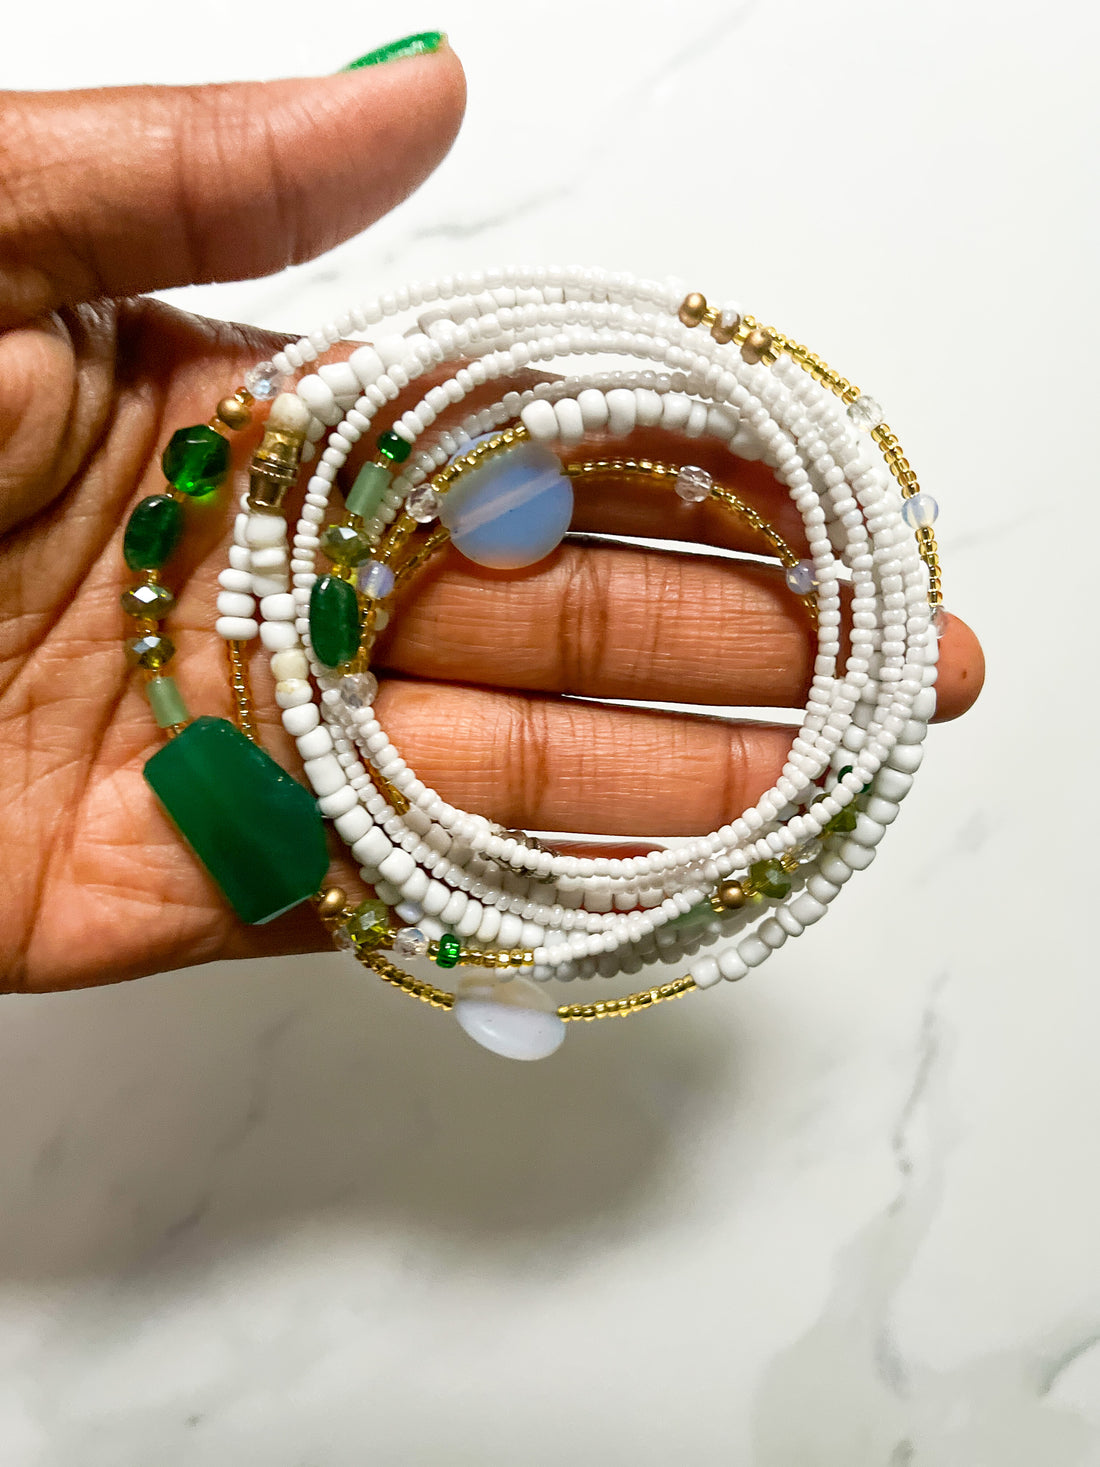 Celestial Being + Green Onyx and Aventurine